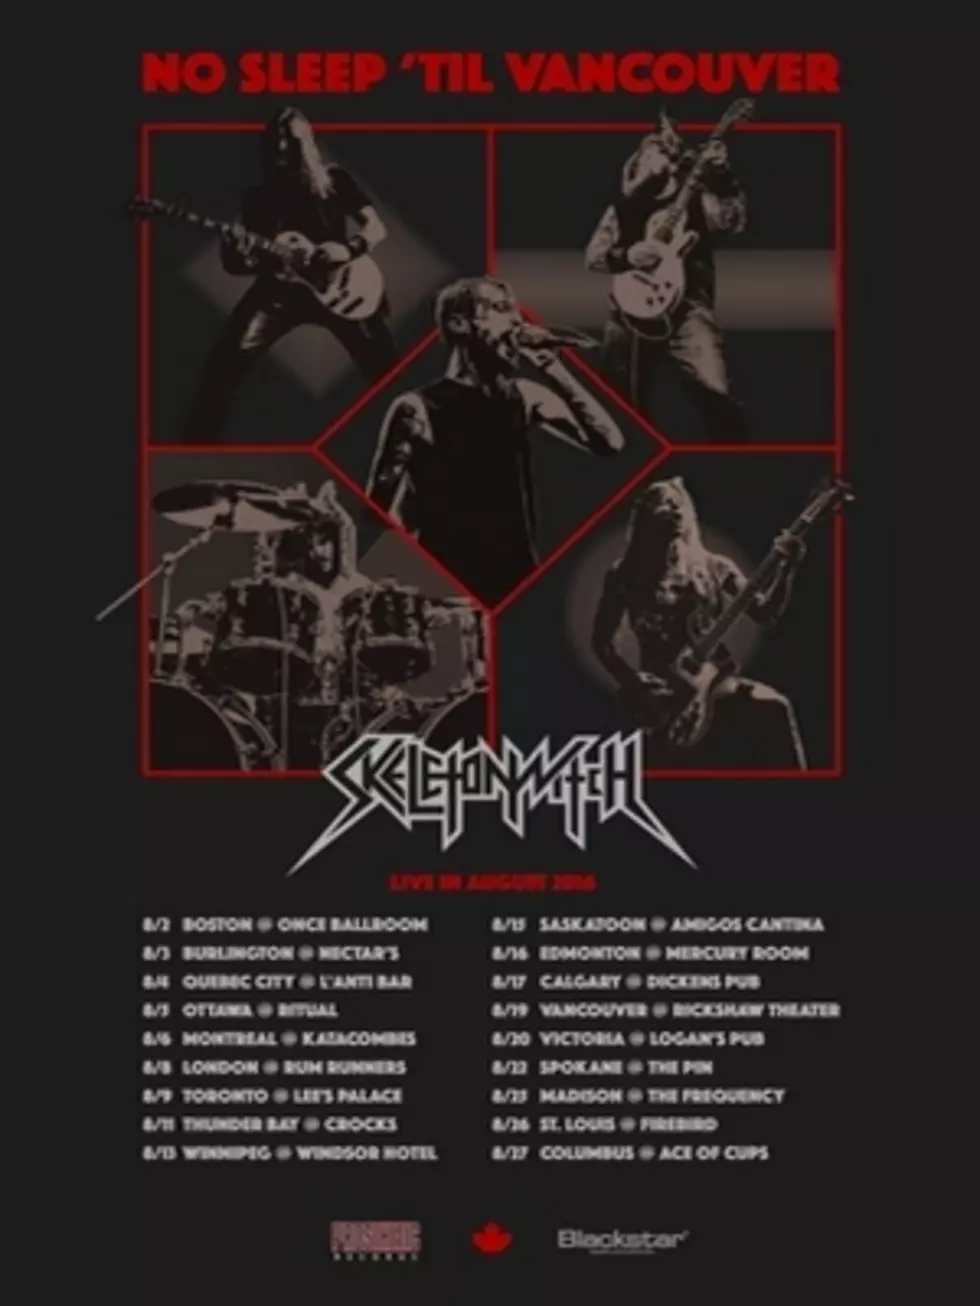 Skeletonwitch Book August 2016 &#8216;No Sleep &#8216;Til Vancouver&#8217; Tour